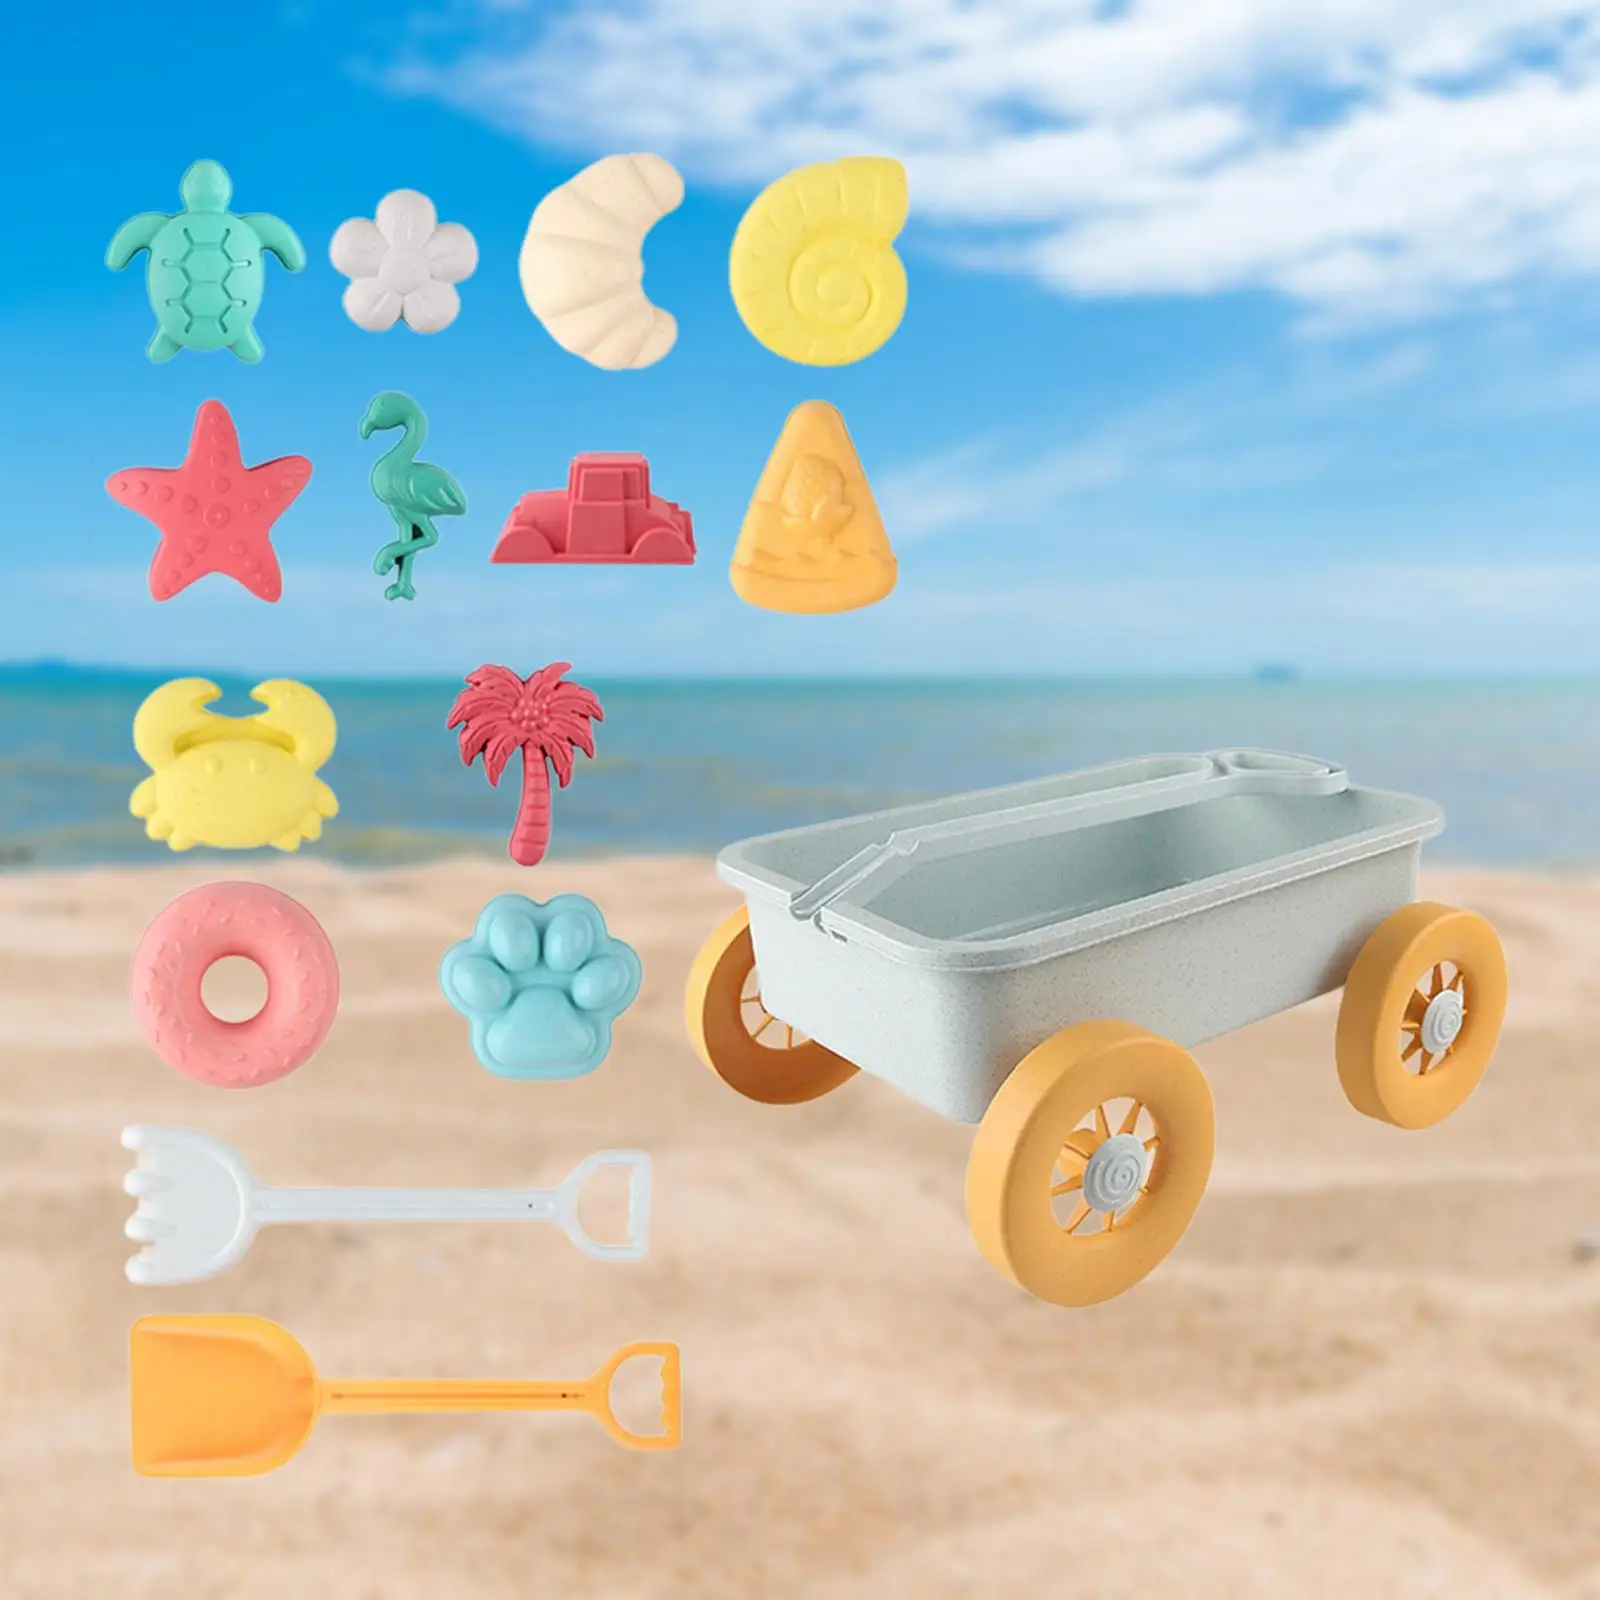 15 Pieces Beach Toys Sand Set,Travel Toys,Includes Sand Models,Petals,Pushcart,Donut,,Turtle,Palm Tree,Beach Toys for Kids